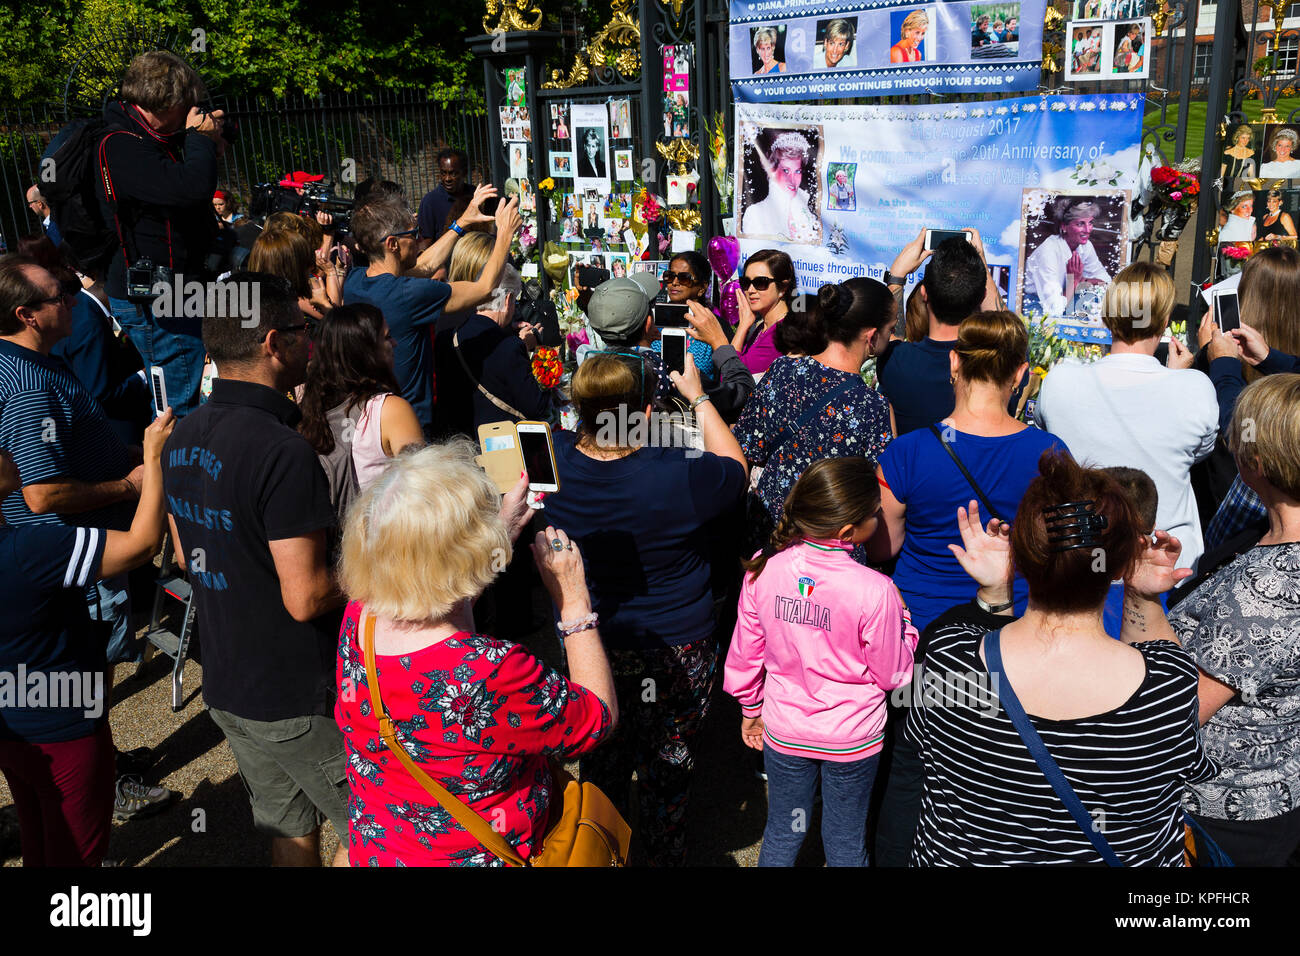 London, UK. A crowd takes pictures with mobile phones of a memorial dedicated to the 20th anniversary of the death of Diana Princess of Wales. Stock Photo